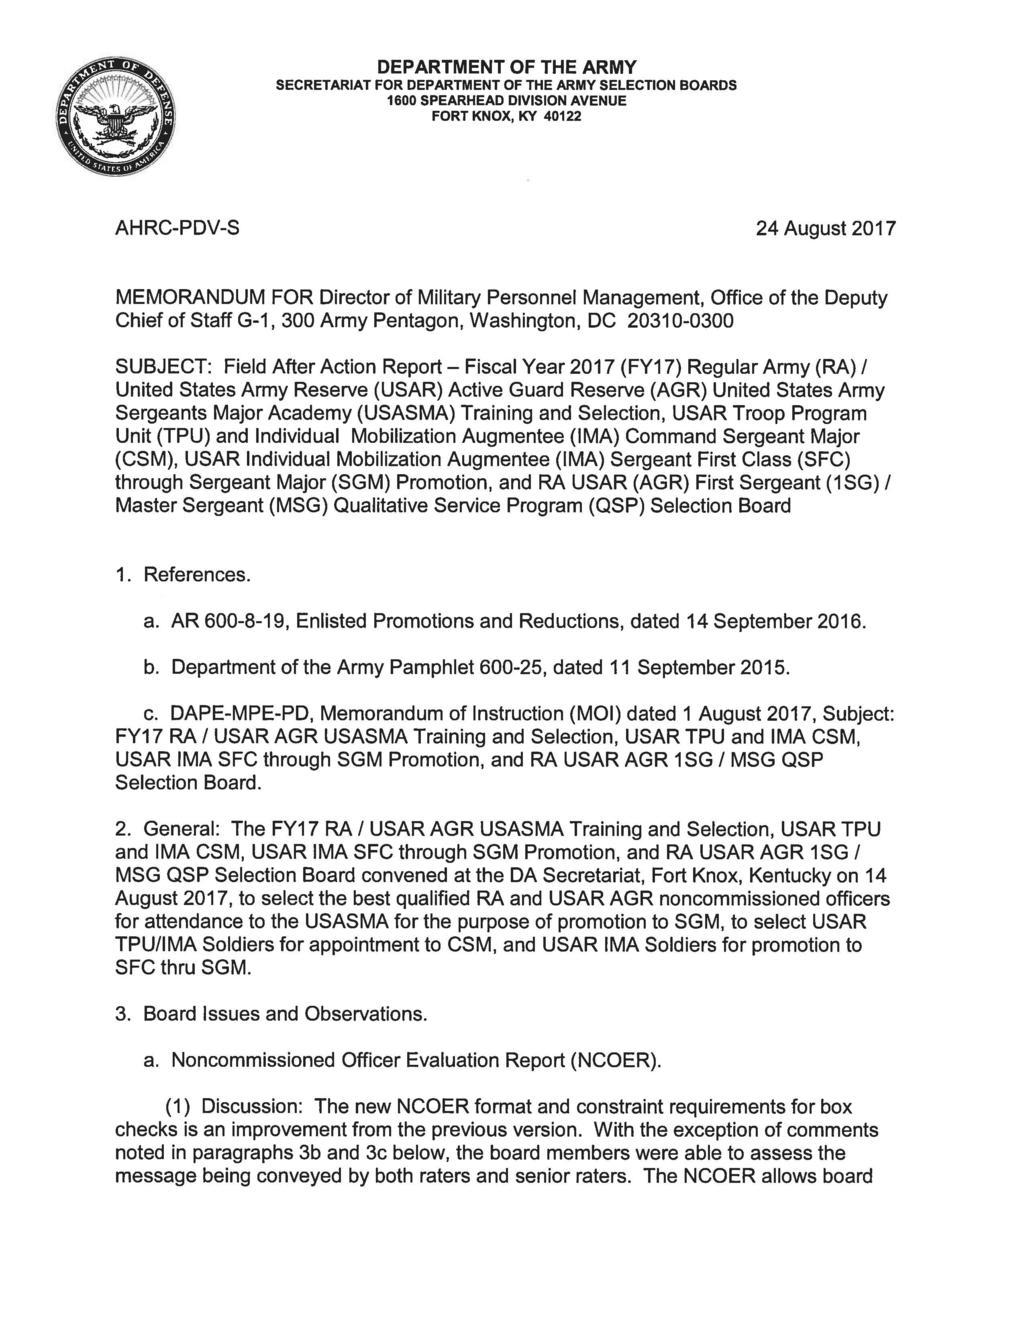 DEPARTMENT OF THE ARMY SECRETARIAT FOR DEPARTMENT OF THE ARMY SELECTION BOARDS 1600 SPEARHEAD DIVISION AVENUE FORT KNOX, KY 40122 AHRC-PDV-S 24 August 2017 MEMORANDUM FOR Director of Military